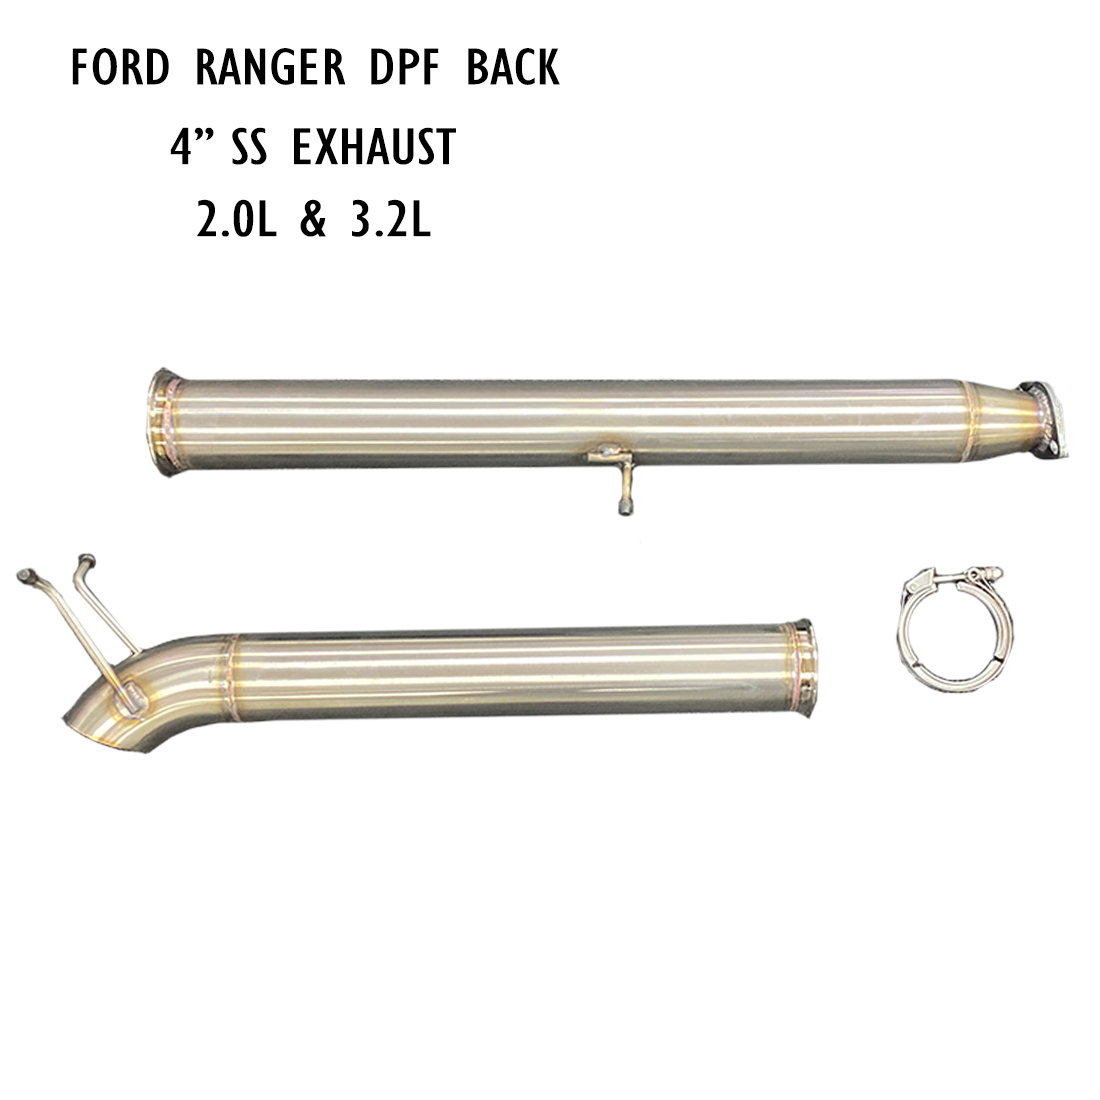 Ford PX2/PX3 Ranger Exhaust 3.2L & 2.0L 4" DPF Stainless Steel image